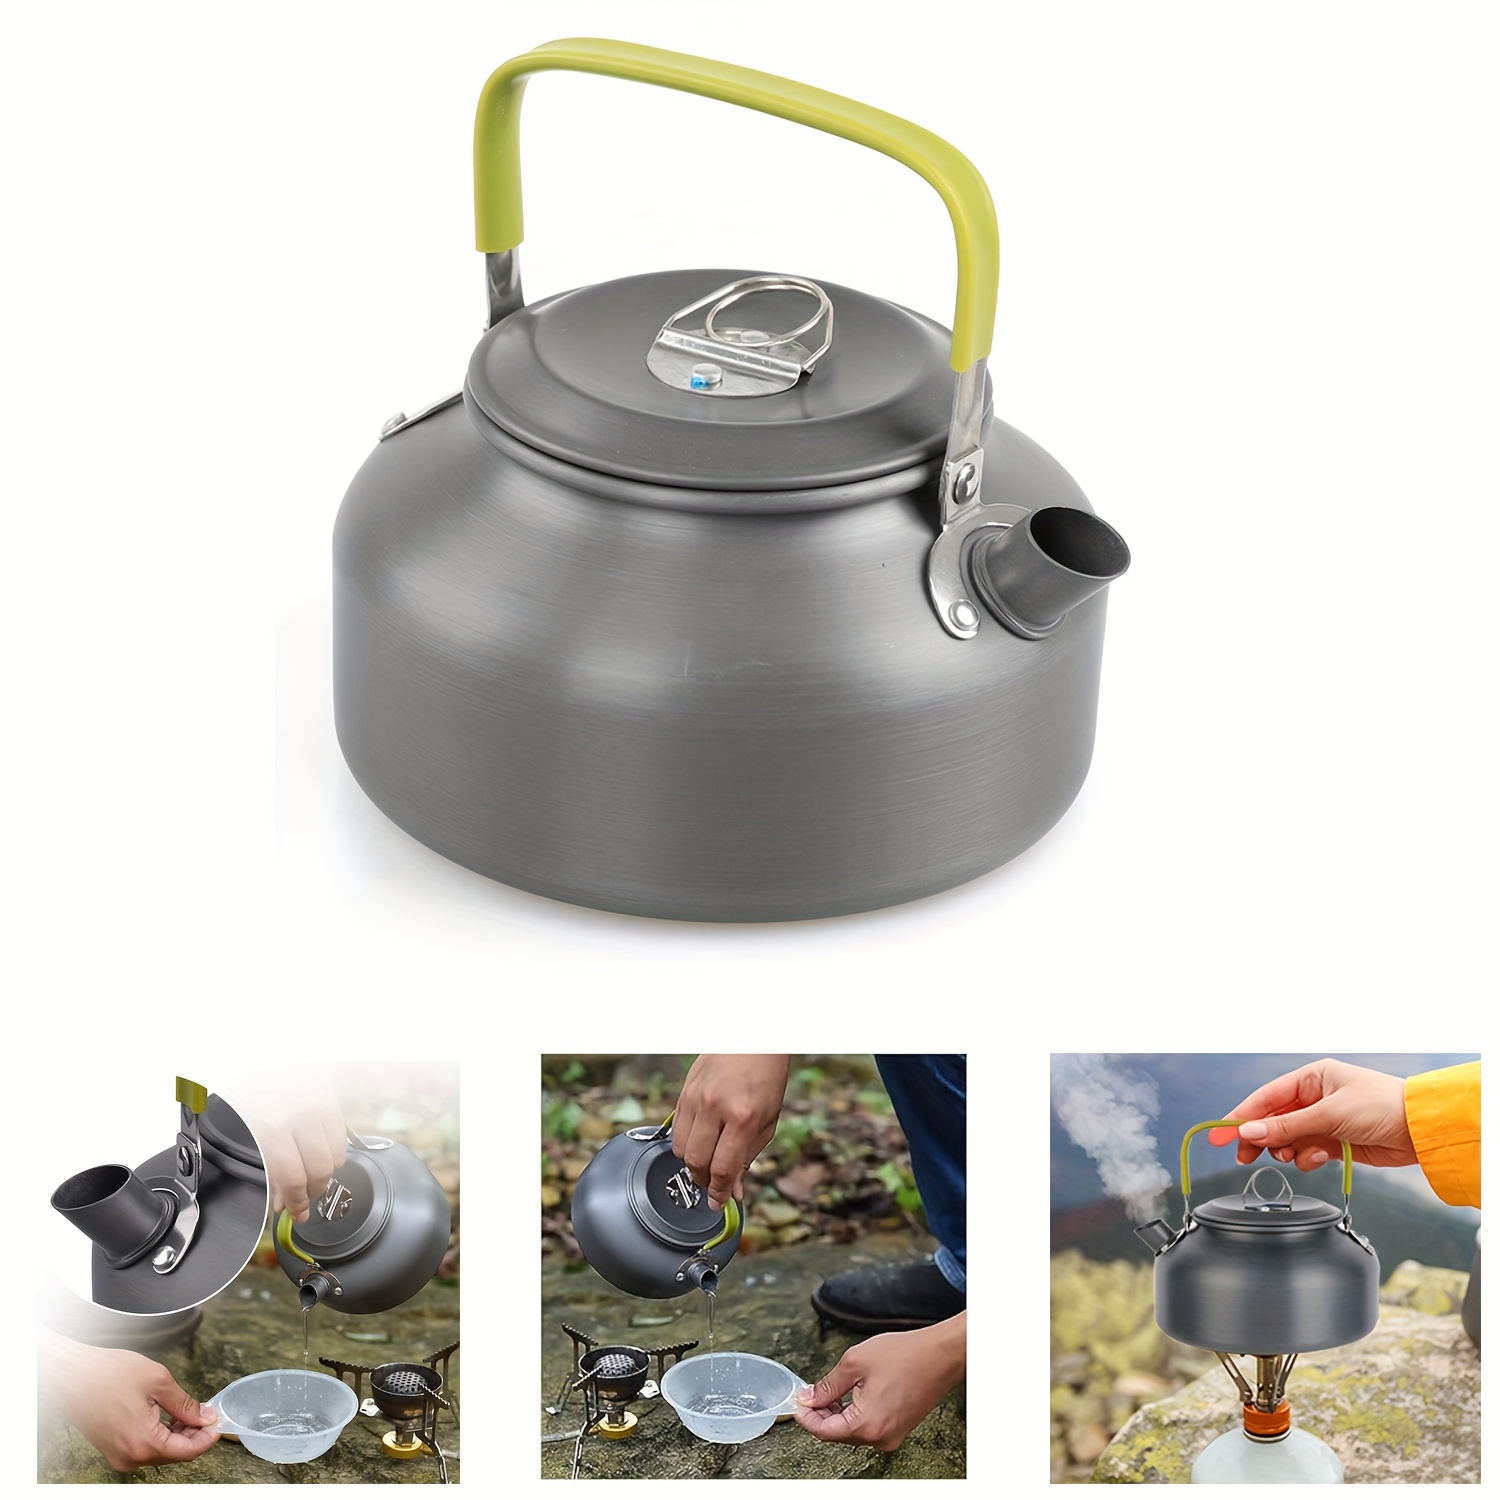 800ml Portable Camping Water Kettle Tea Kettle Stovetop Teapot Aluminum  Alloy Camping Kettle For Hiking Backpacking Quick-heat Green